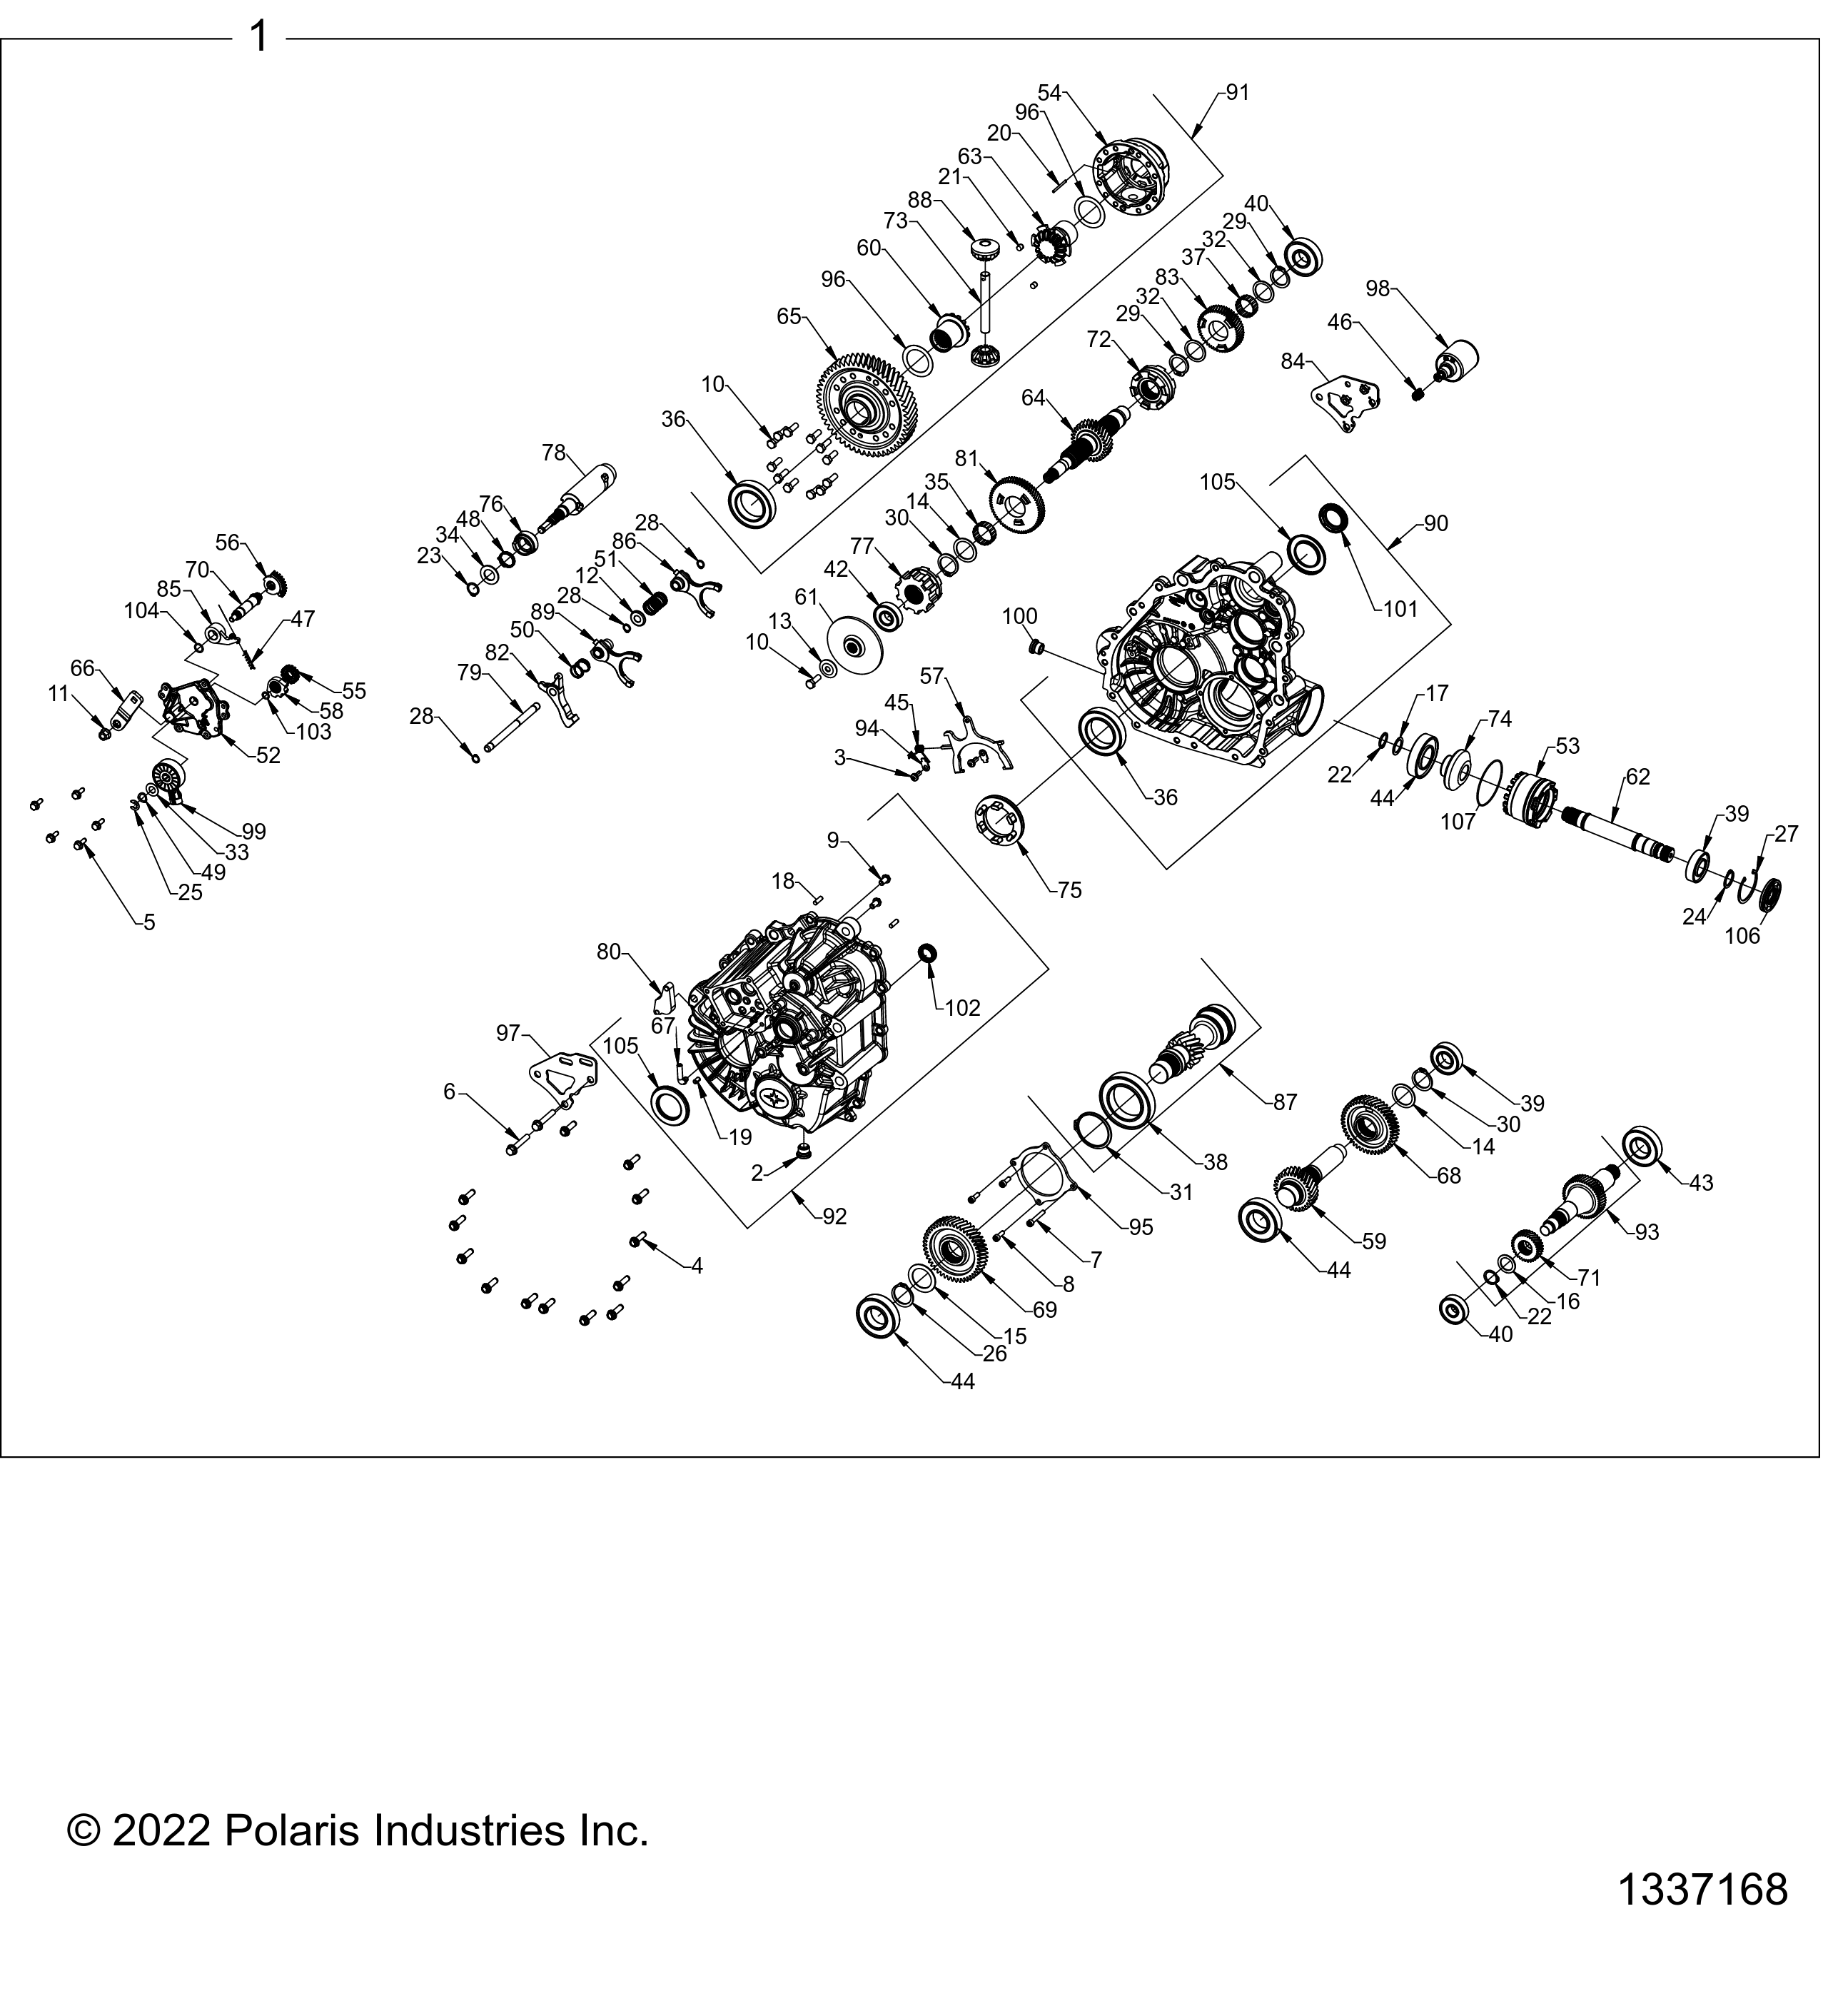 Part Number : 3239476 SUBASSEMBLY-DIFFERENTIAL